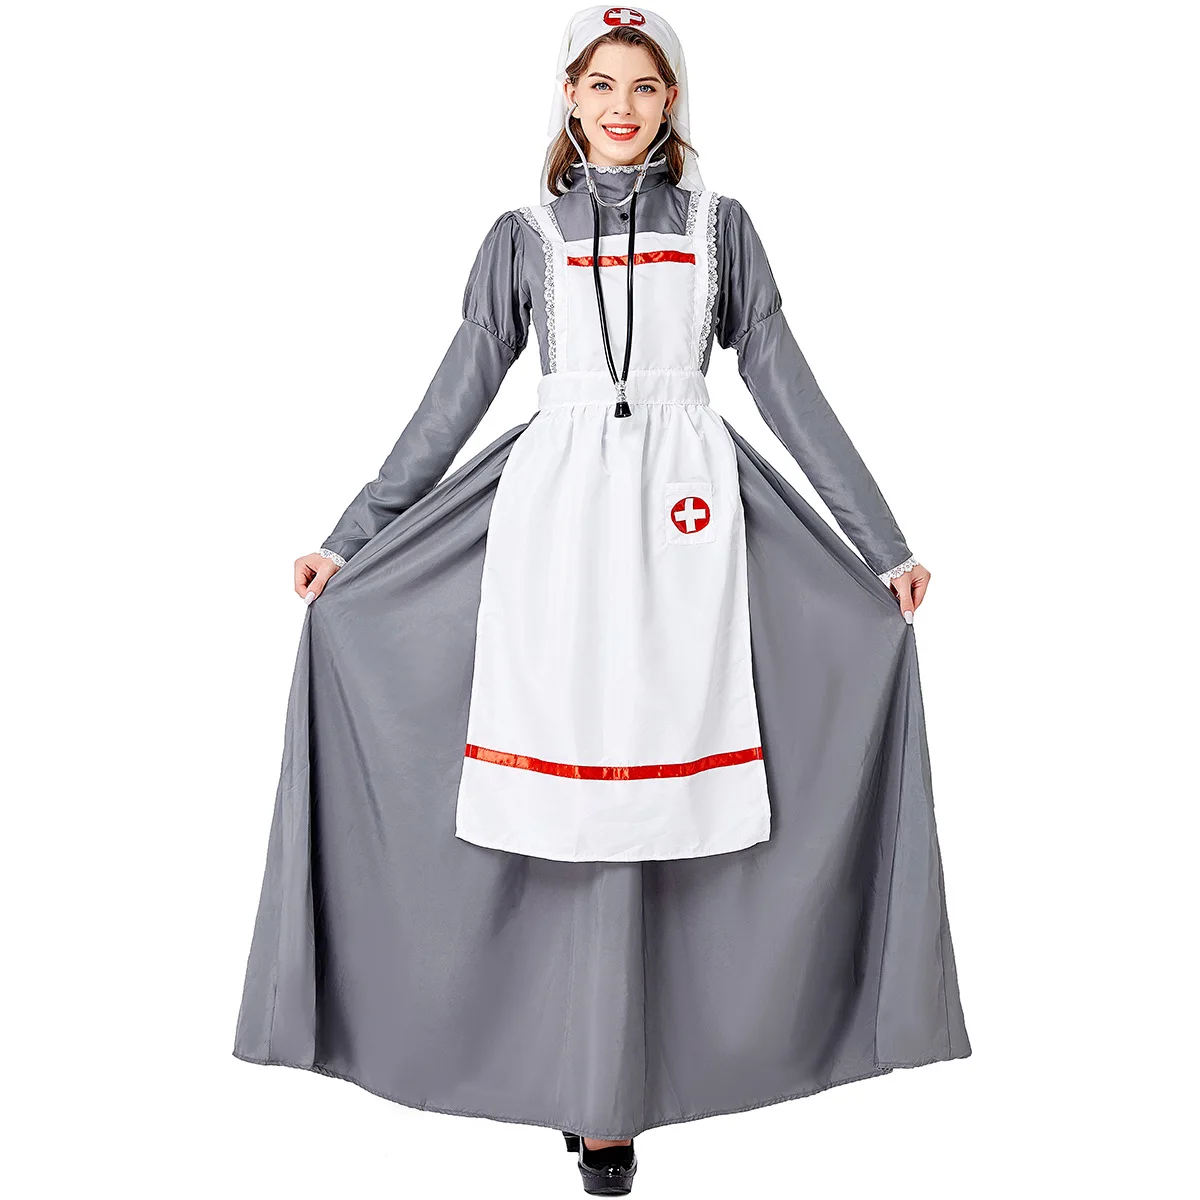 

Medieval Clothing Civil War Nurse Adult Costume For Halloween Women Long Dress Up Cosplay Outfits